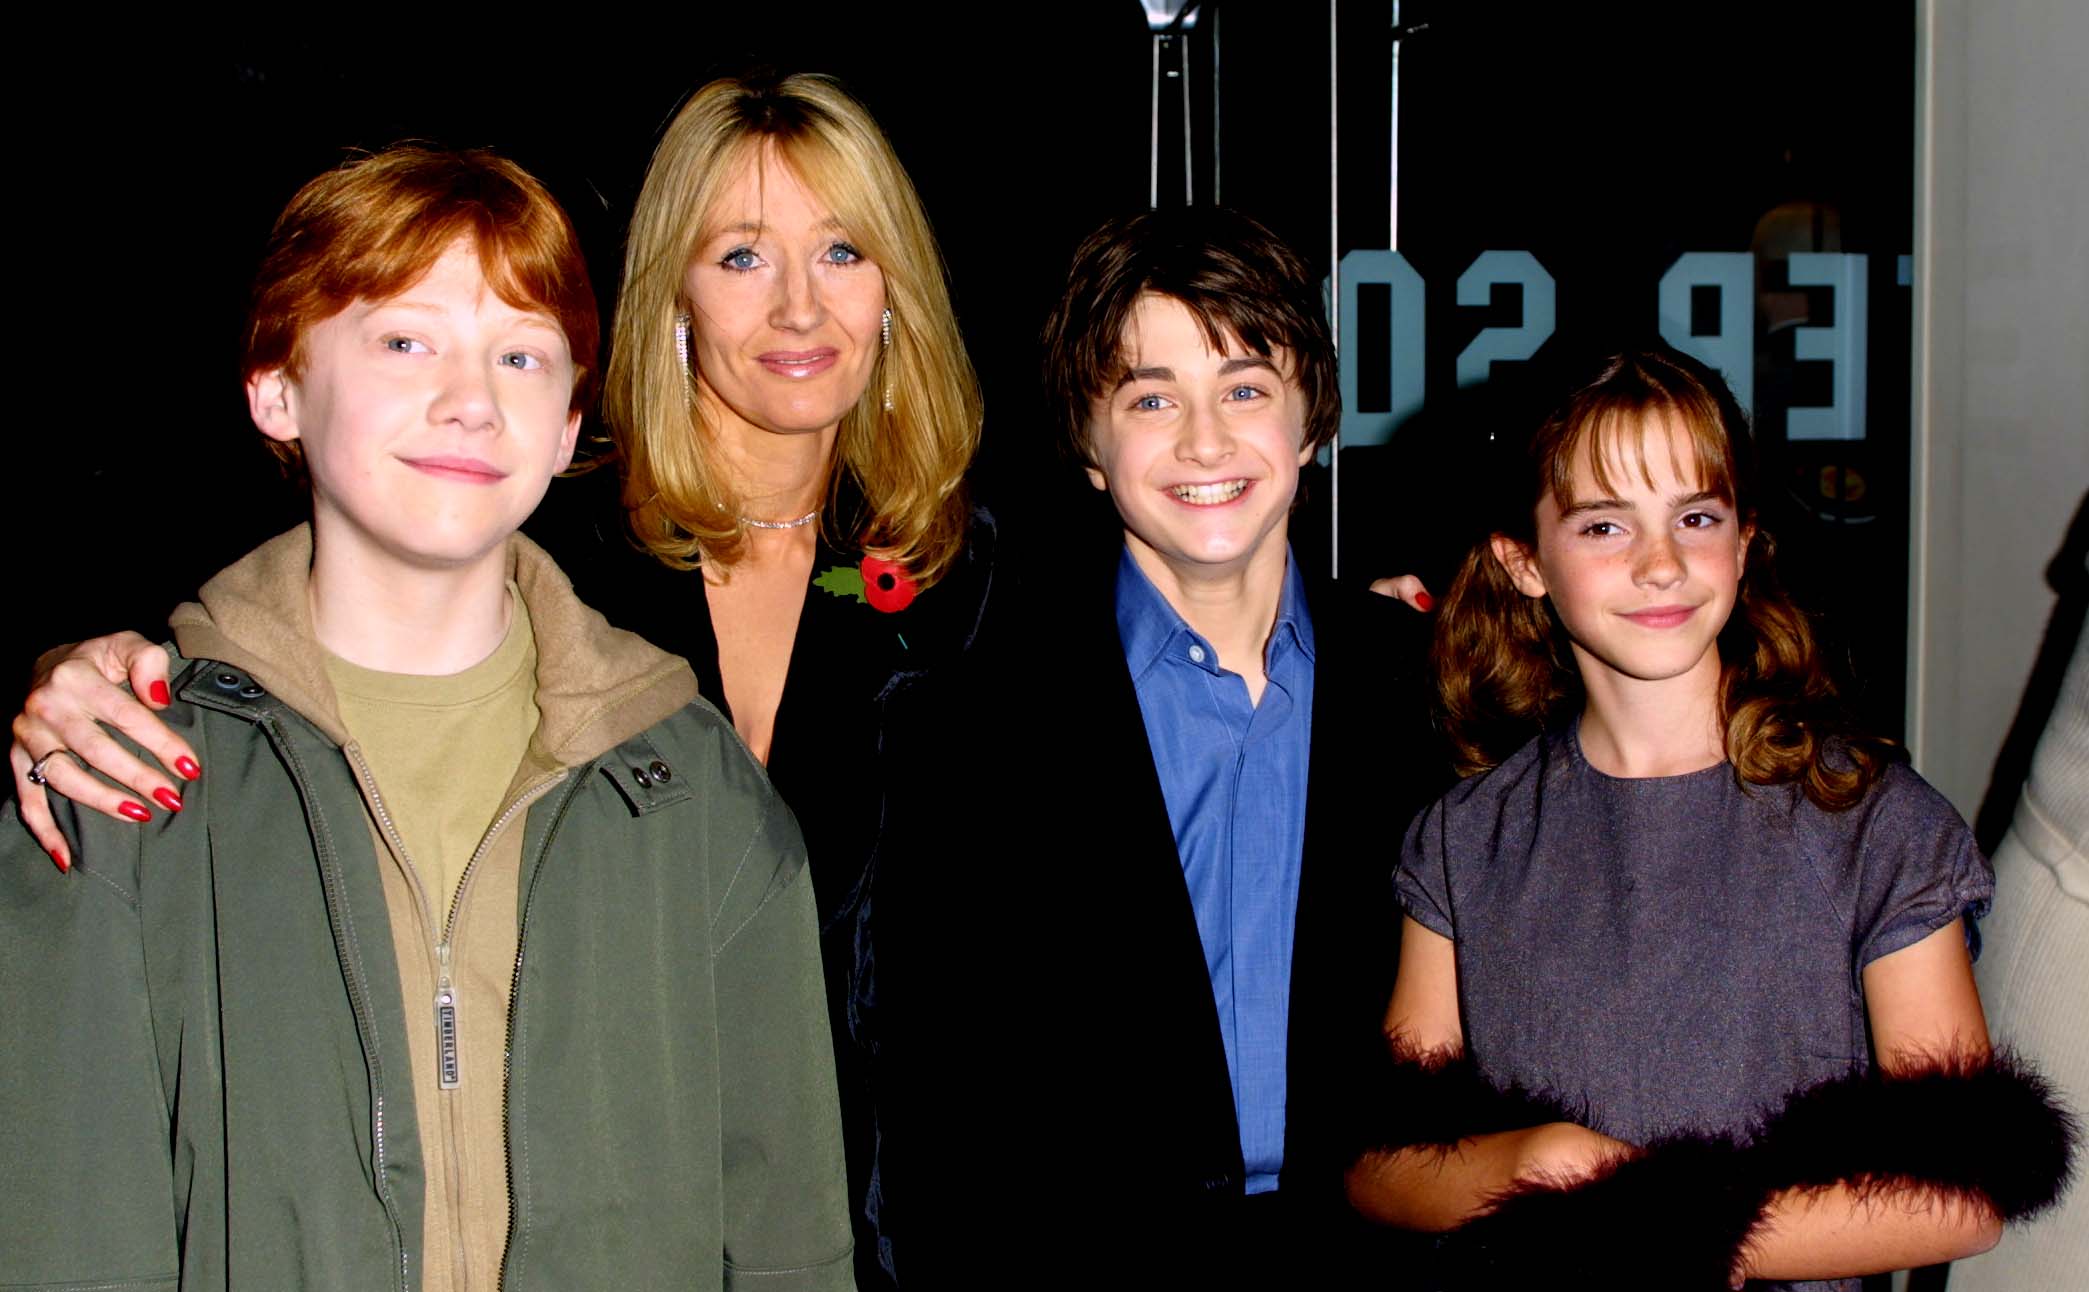 Actors Rupert Grint, Author JK Rowling, Daniel Radcliffe and Emma Watson attend the world premiere of the first Harry Potter film, 'Harry Potter and the Philosopher's Stone' at the Odeon Leicester Square, London, November 4, 2001. | Source: Getty Images